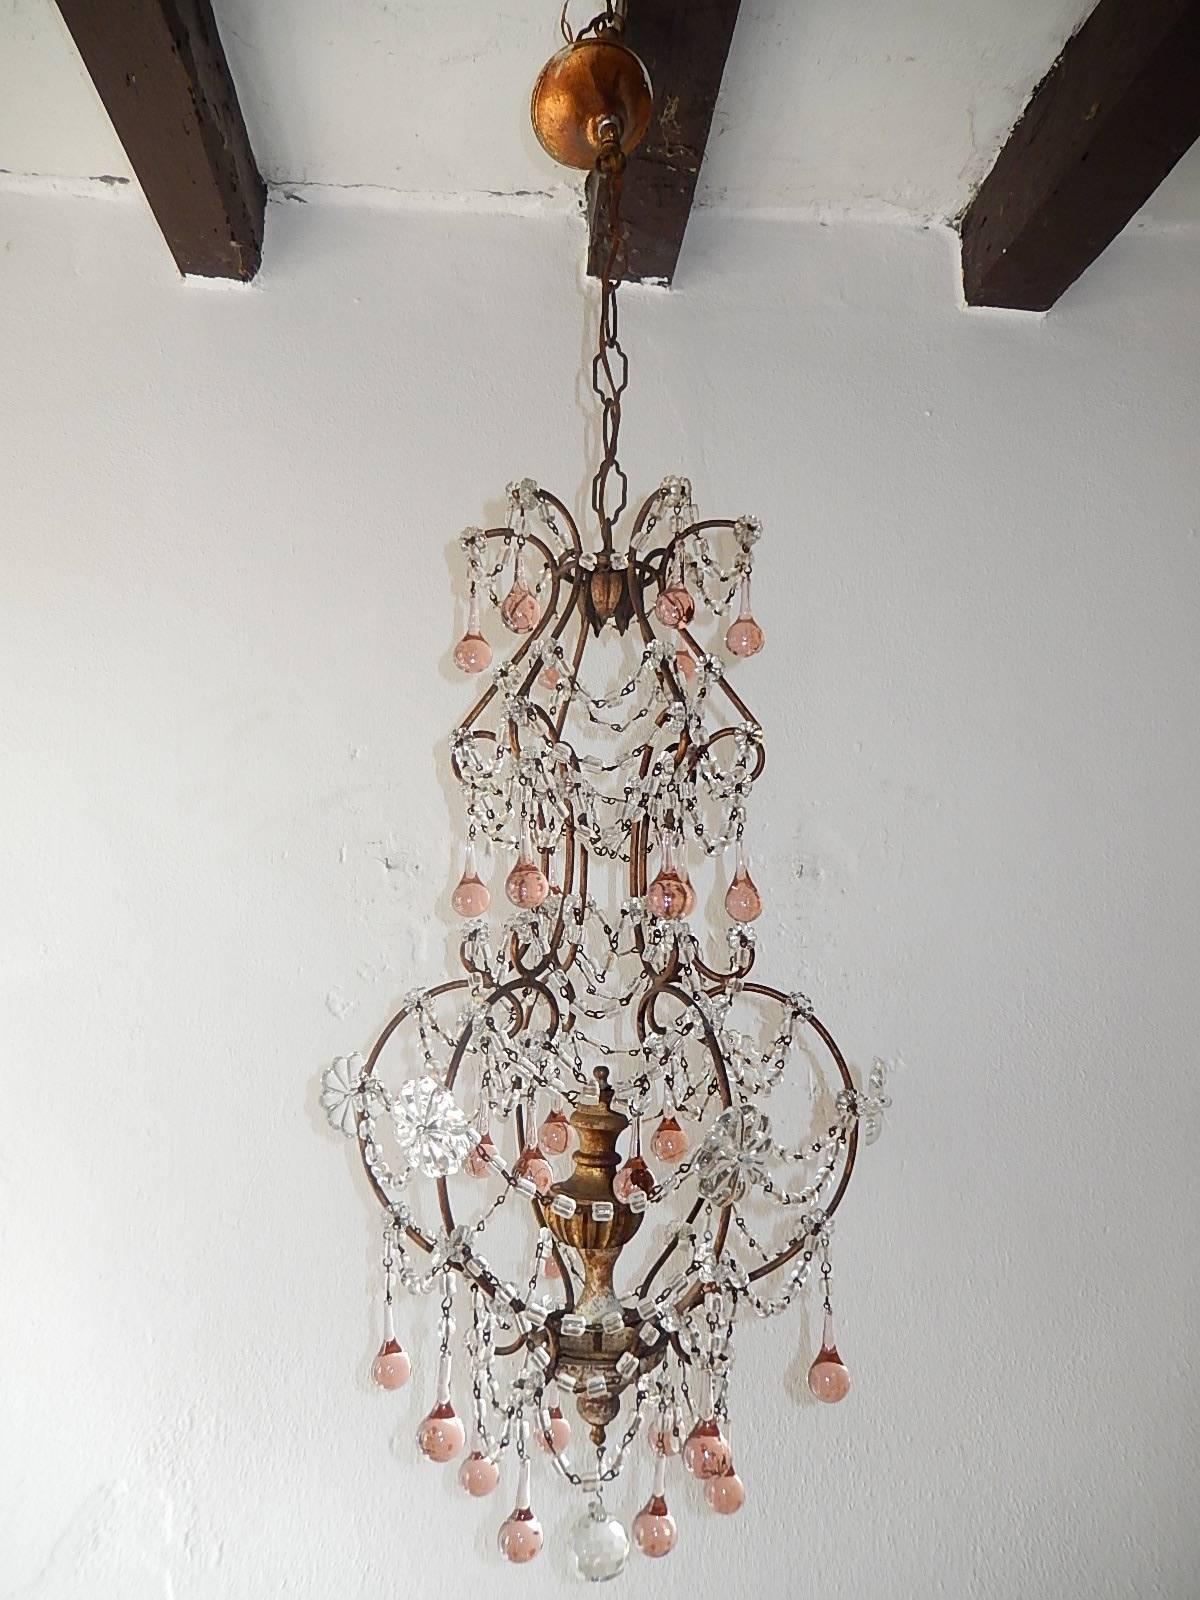 Housing 1 light in top center.  Gilt center and bottom with gold worn off in places and one inch crack in the wood.  Swags of macaroni beads and adorning rare pink Murano drops.  Re wired and ready to hang.  Free shipping from Italy.  Adding another